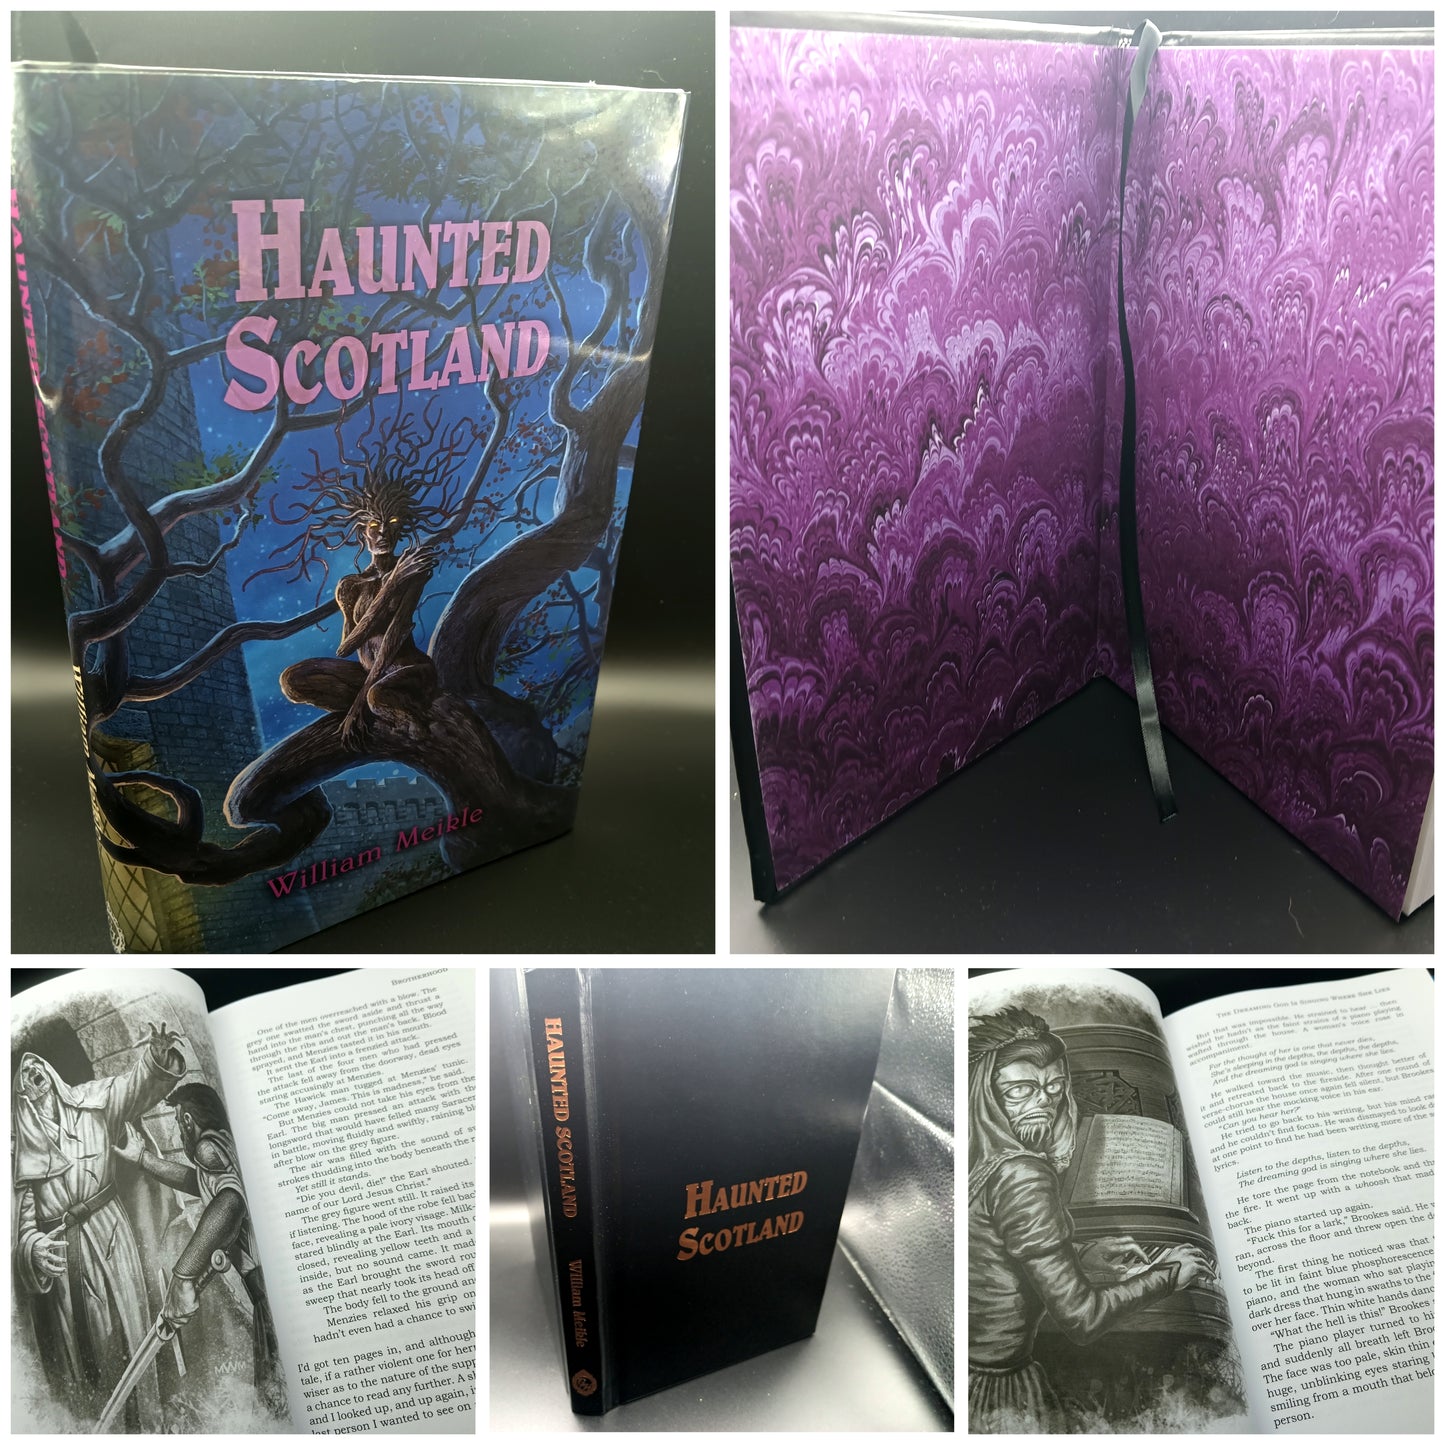 Haunted Scotland by William Meikle